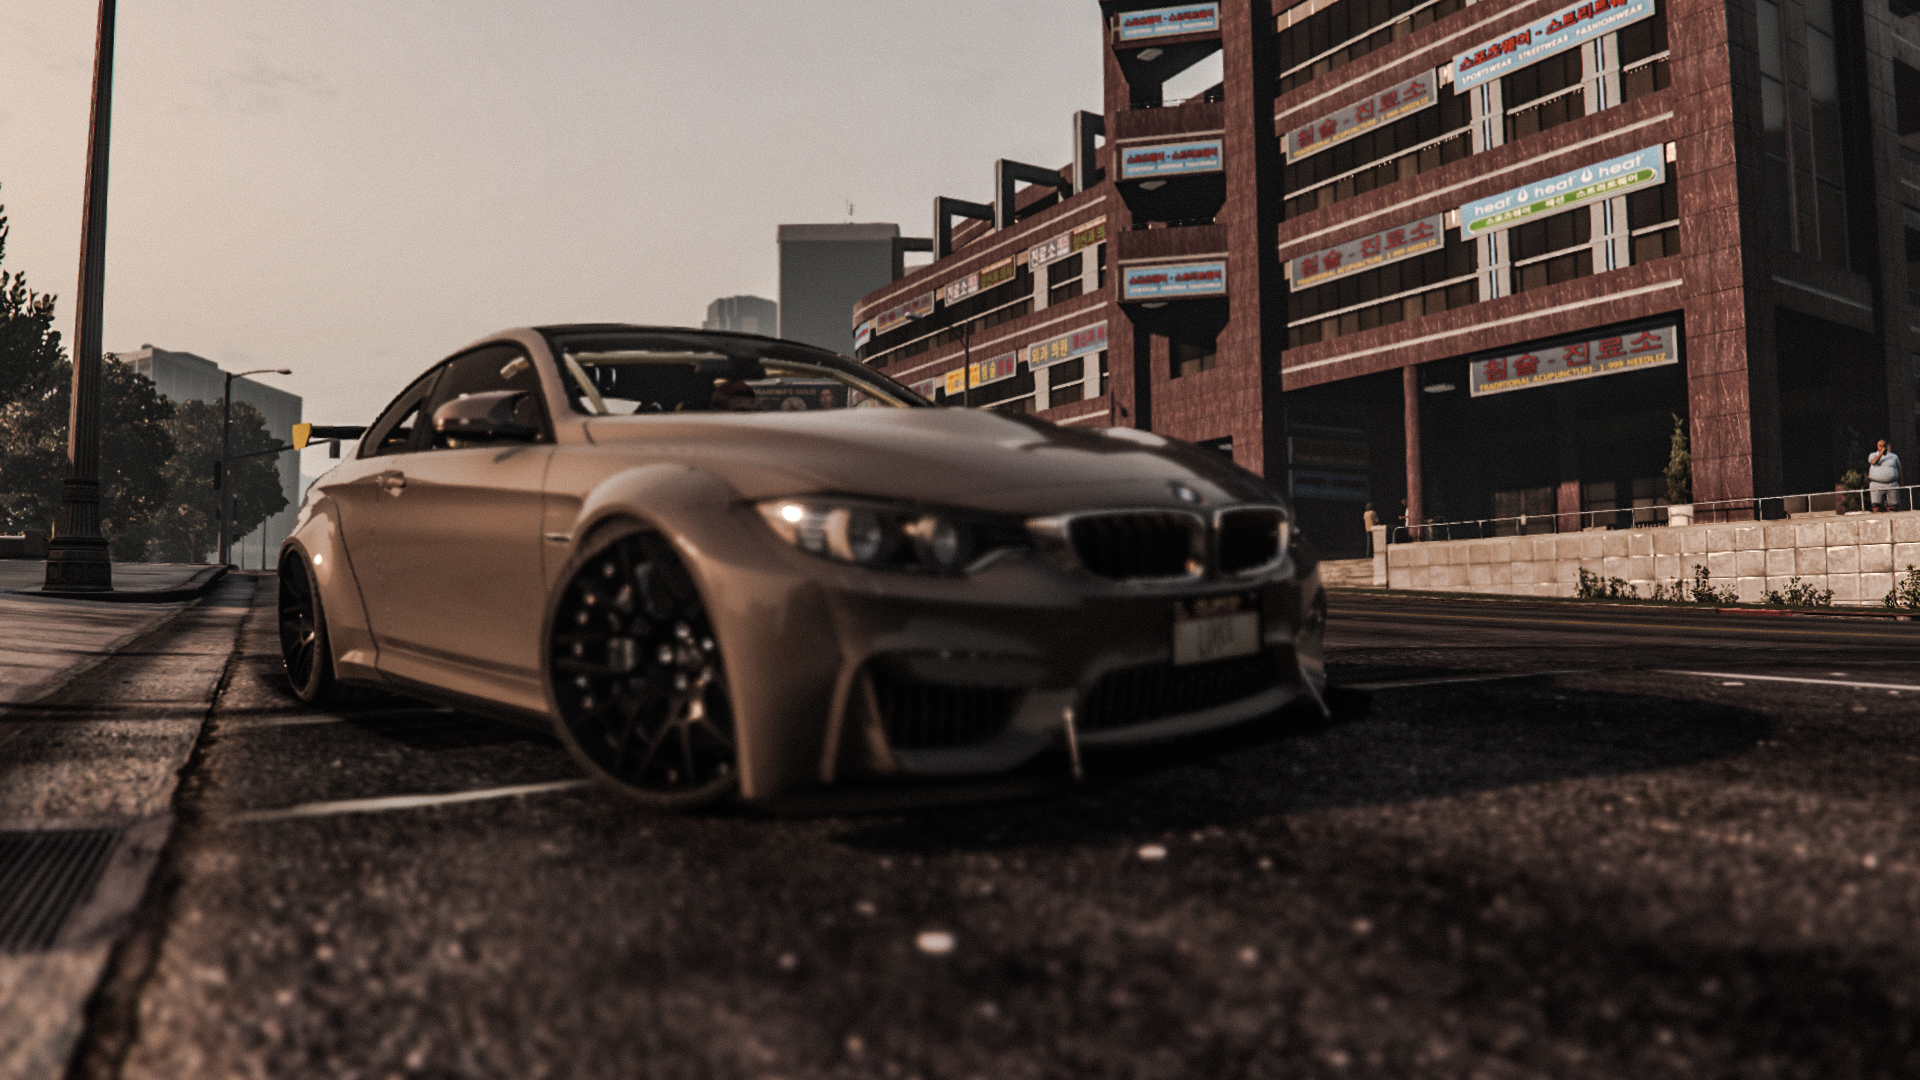 General 1920x1080 BMW Grand Theft Auto V Grand Theft Auto car sport BMW 1 series vehicle screen shot PC gaming video games